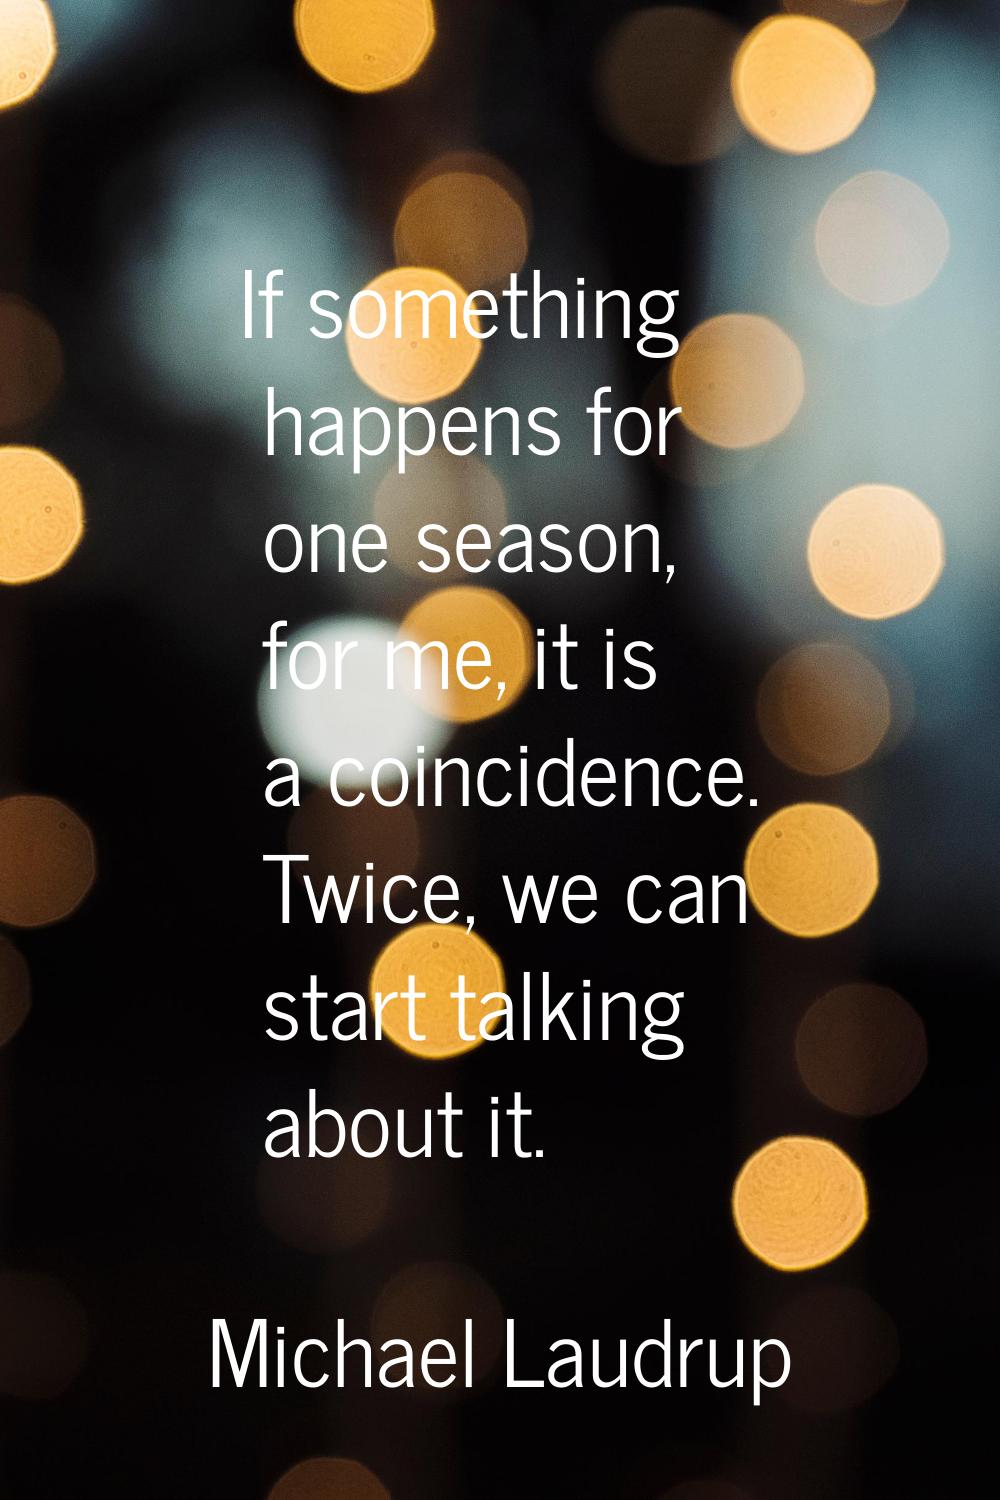 If something happens for one season, for me, it is a coincidence. Twice, we can start talking about